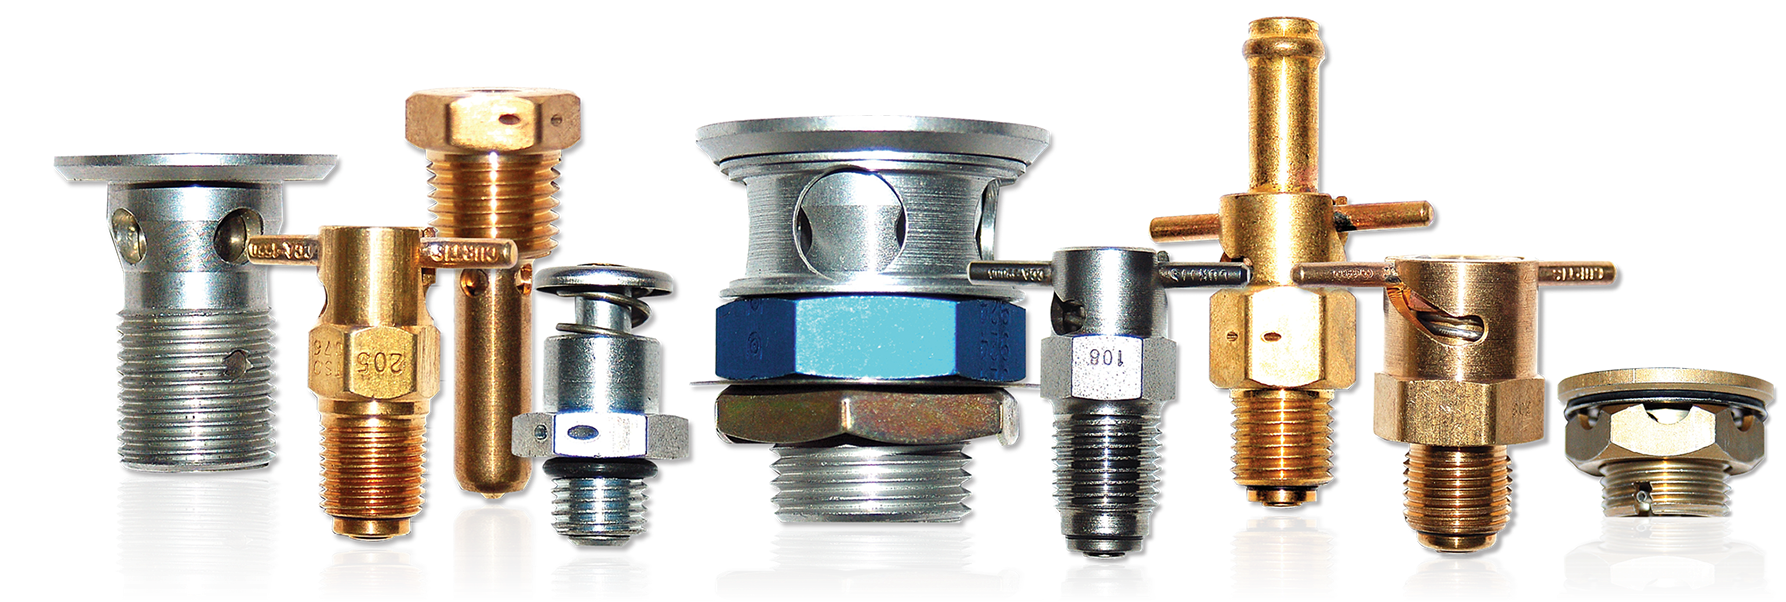 Curtis Valves for aircraft engine fuel system plane parts and utility vehicles UTVs